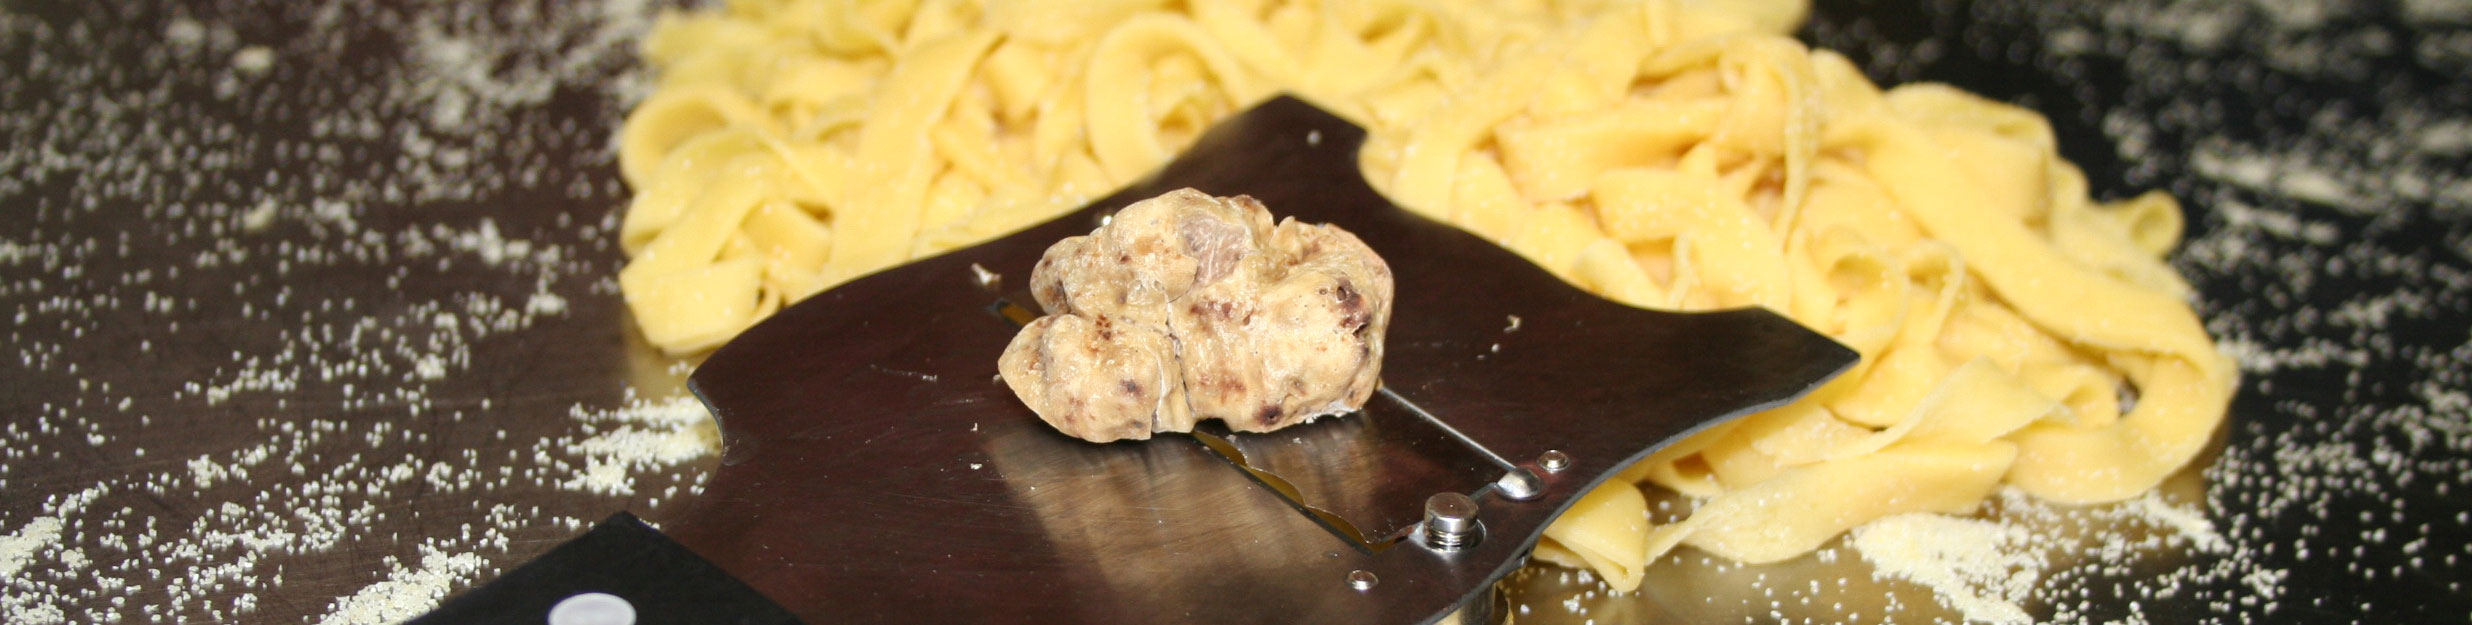 Cooking classes with gastronomic delights such as Truffle, porcini Mushrooms in Marche Italy